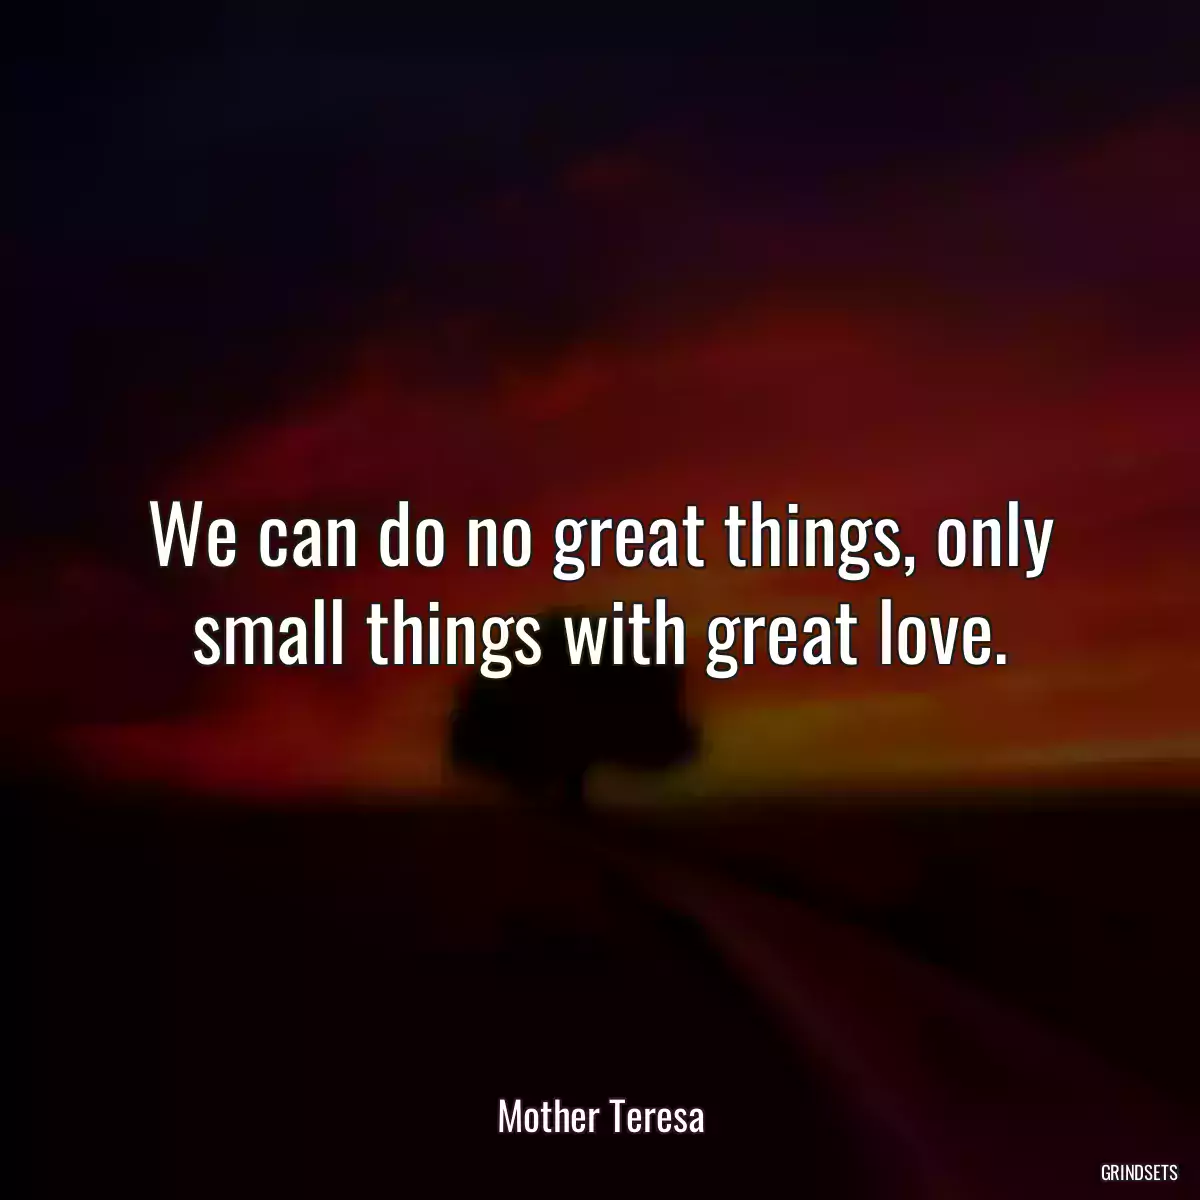 We can do no great things, only small things with great love.